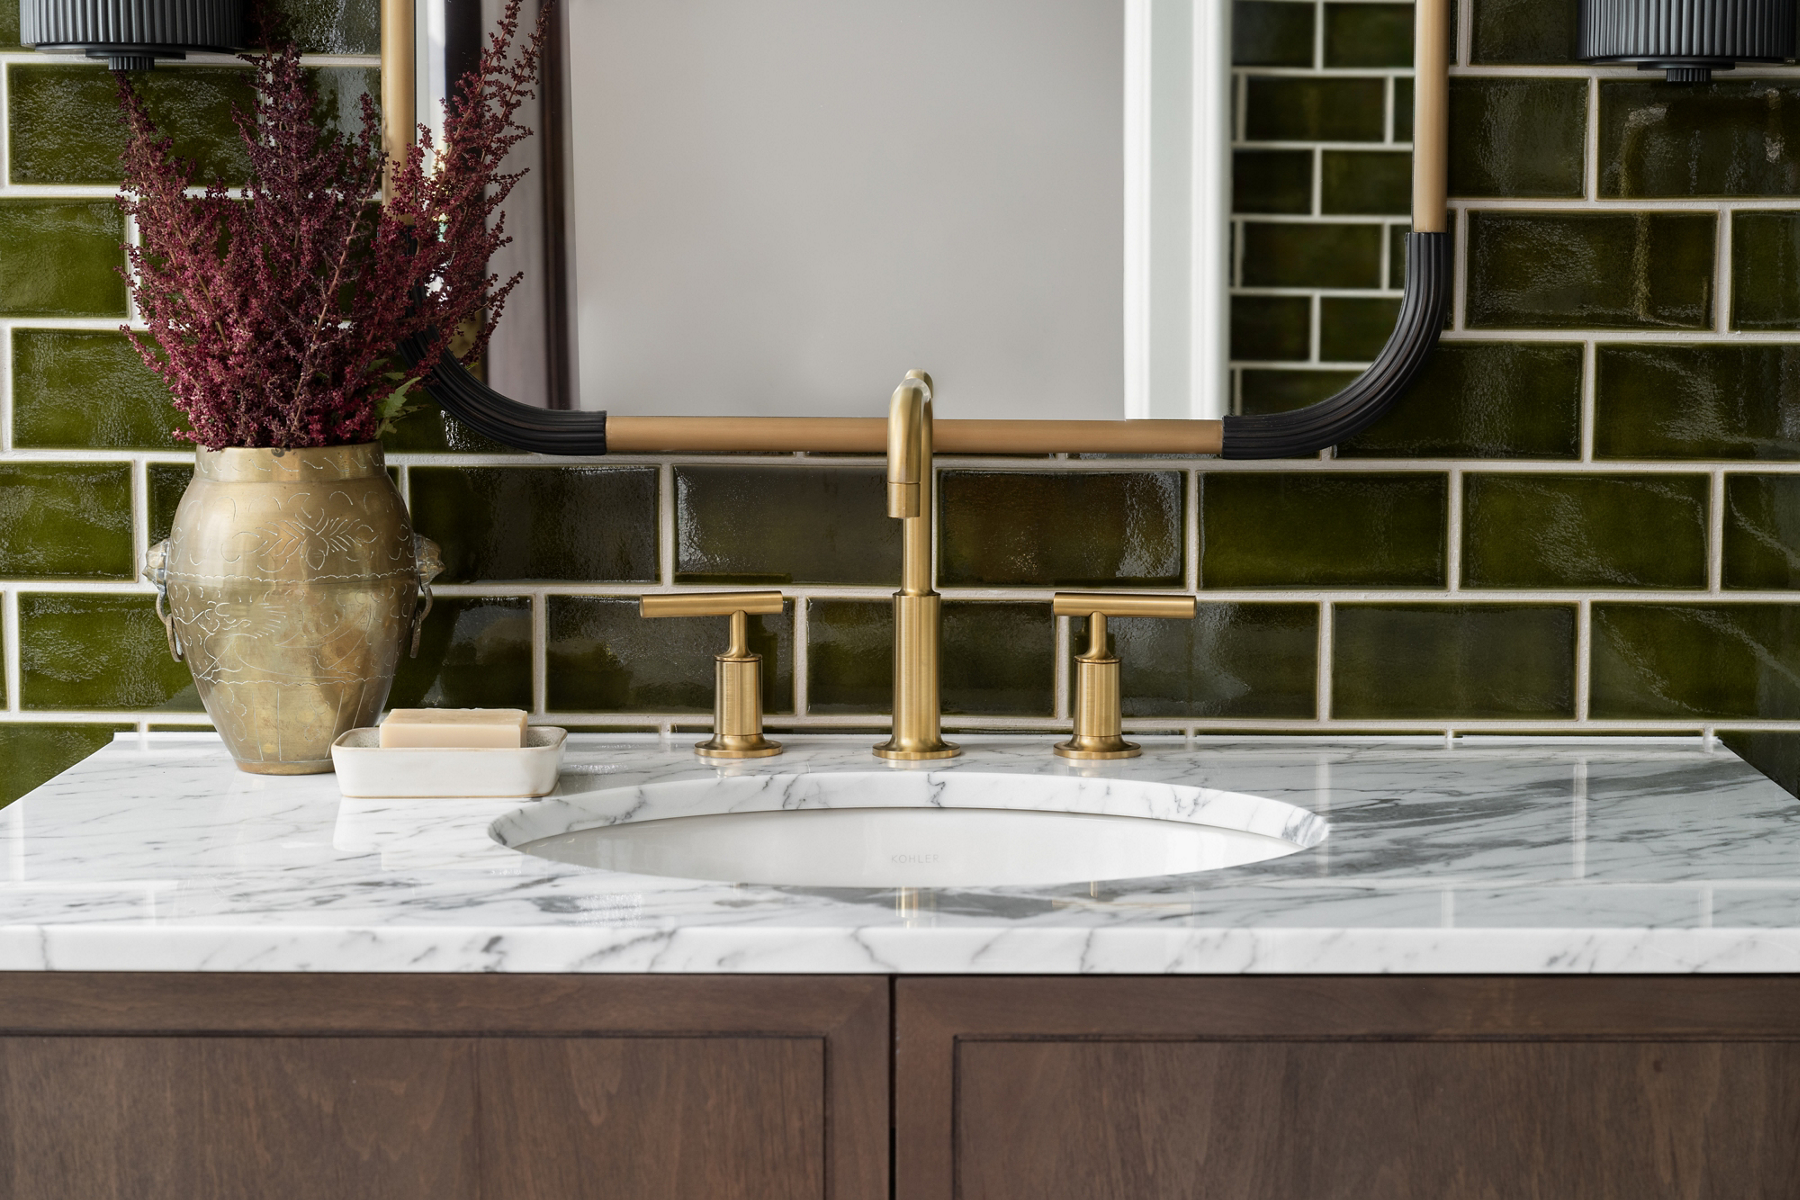 A close up shot of a bathroom sink with a white sink rounded bowl and gold faucet and handles all attached on the marble counter top.